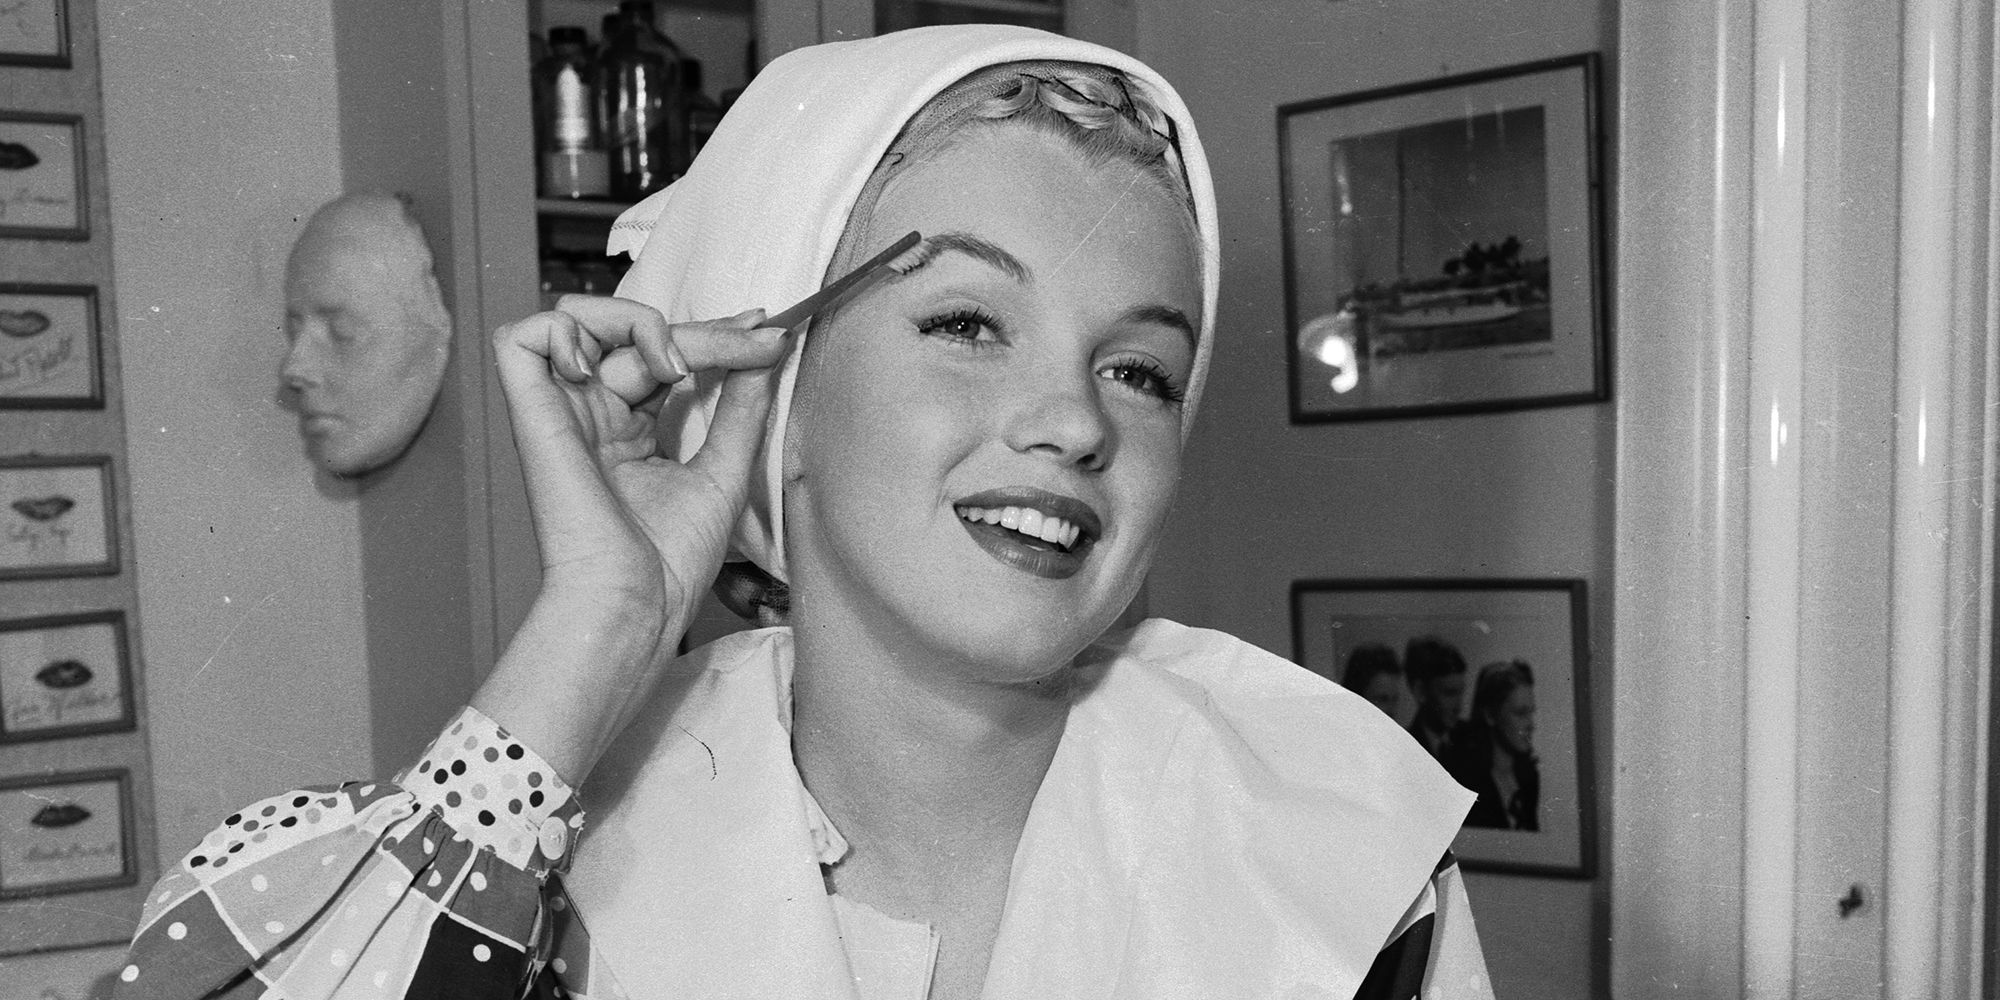 A Look Inside The Weird Vintage Health And Beauty Trends Of Yesteryear